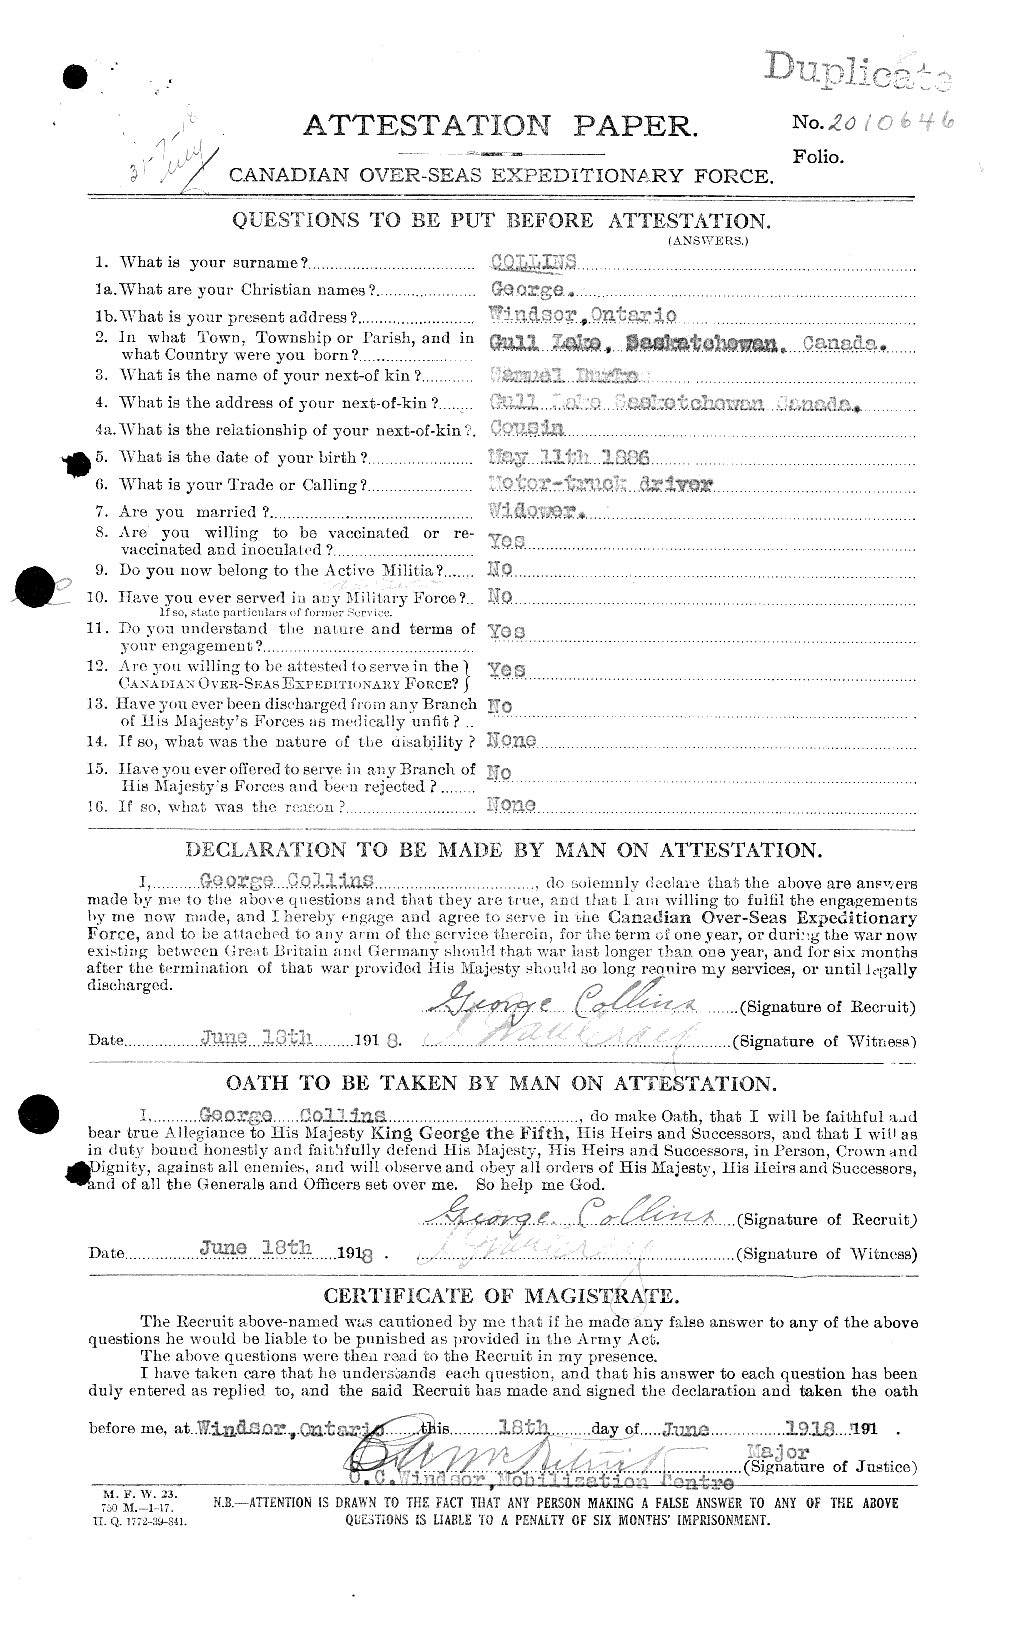 Personnel Records of the First World War - CEF 037853a